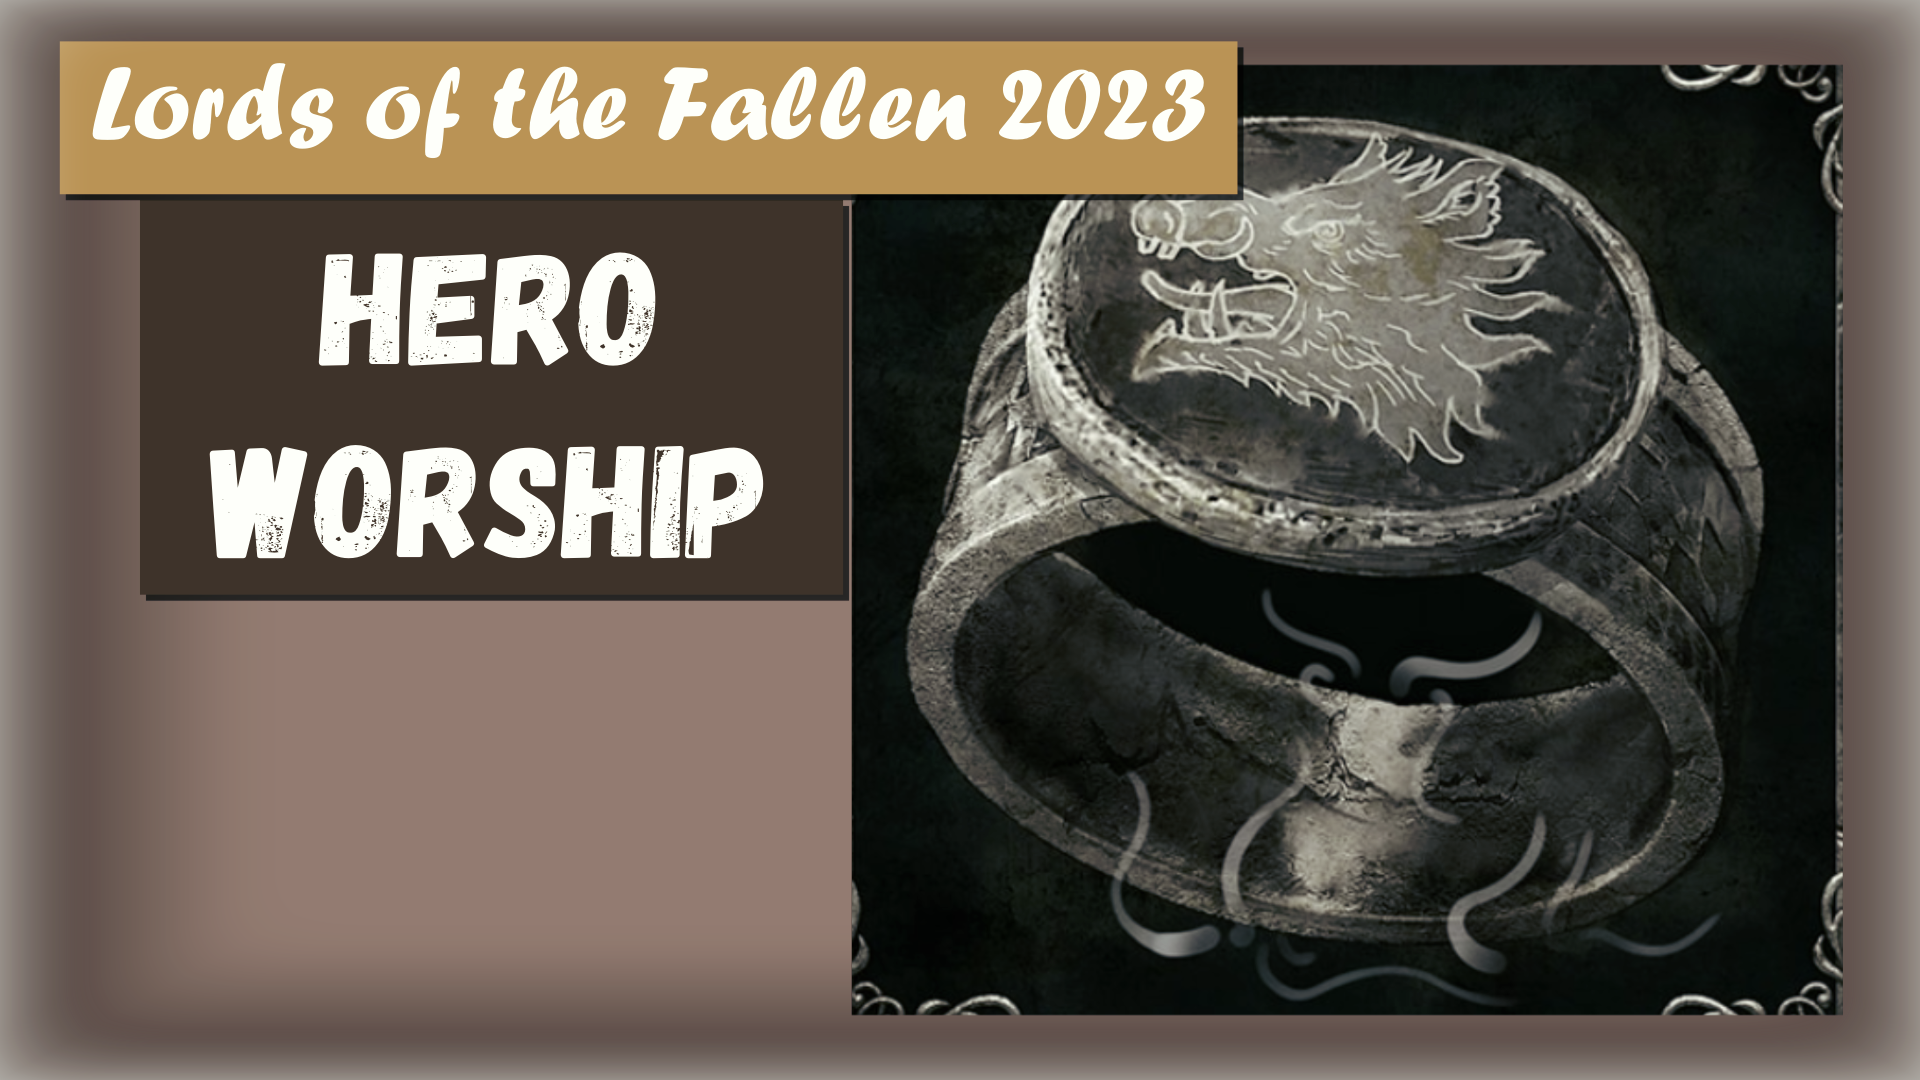 Lords of the Fallen 2023. Трофей "Hero Worship"  Квест Драстана. Стигма: Брата